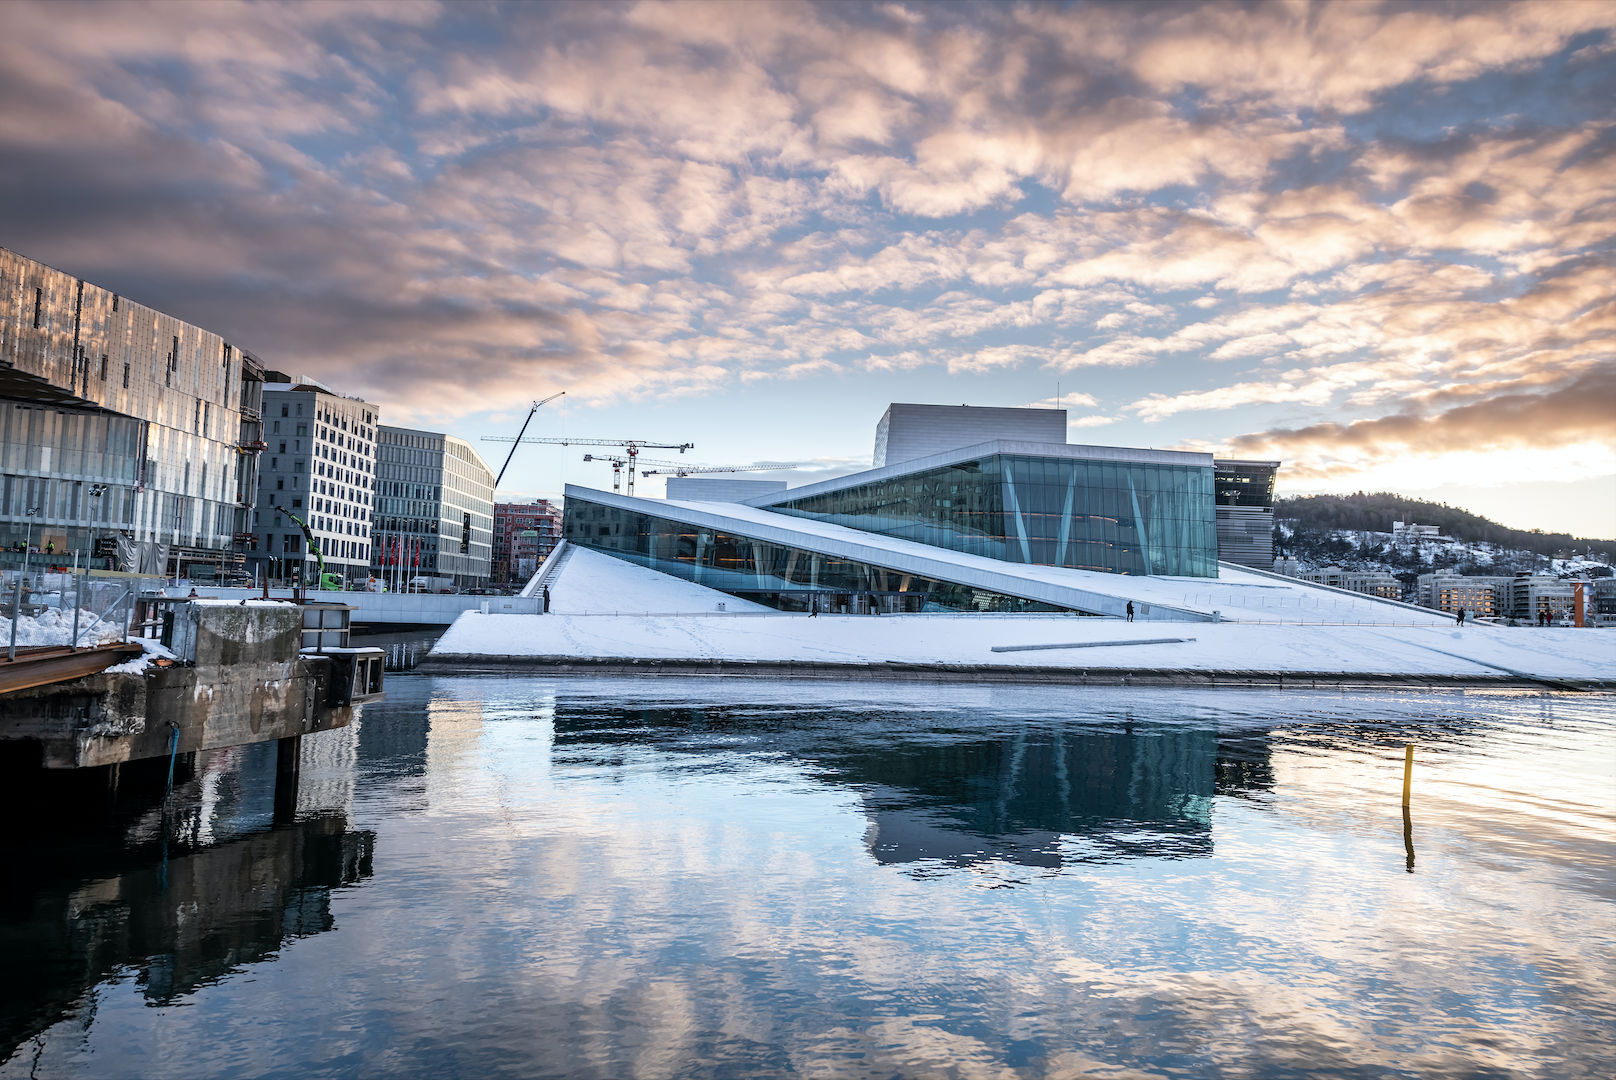 View of the Oslo Opera House with a cloudy sky.